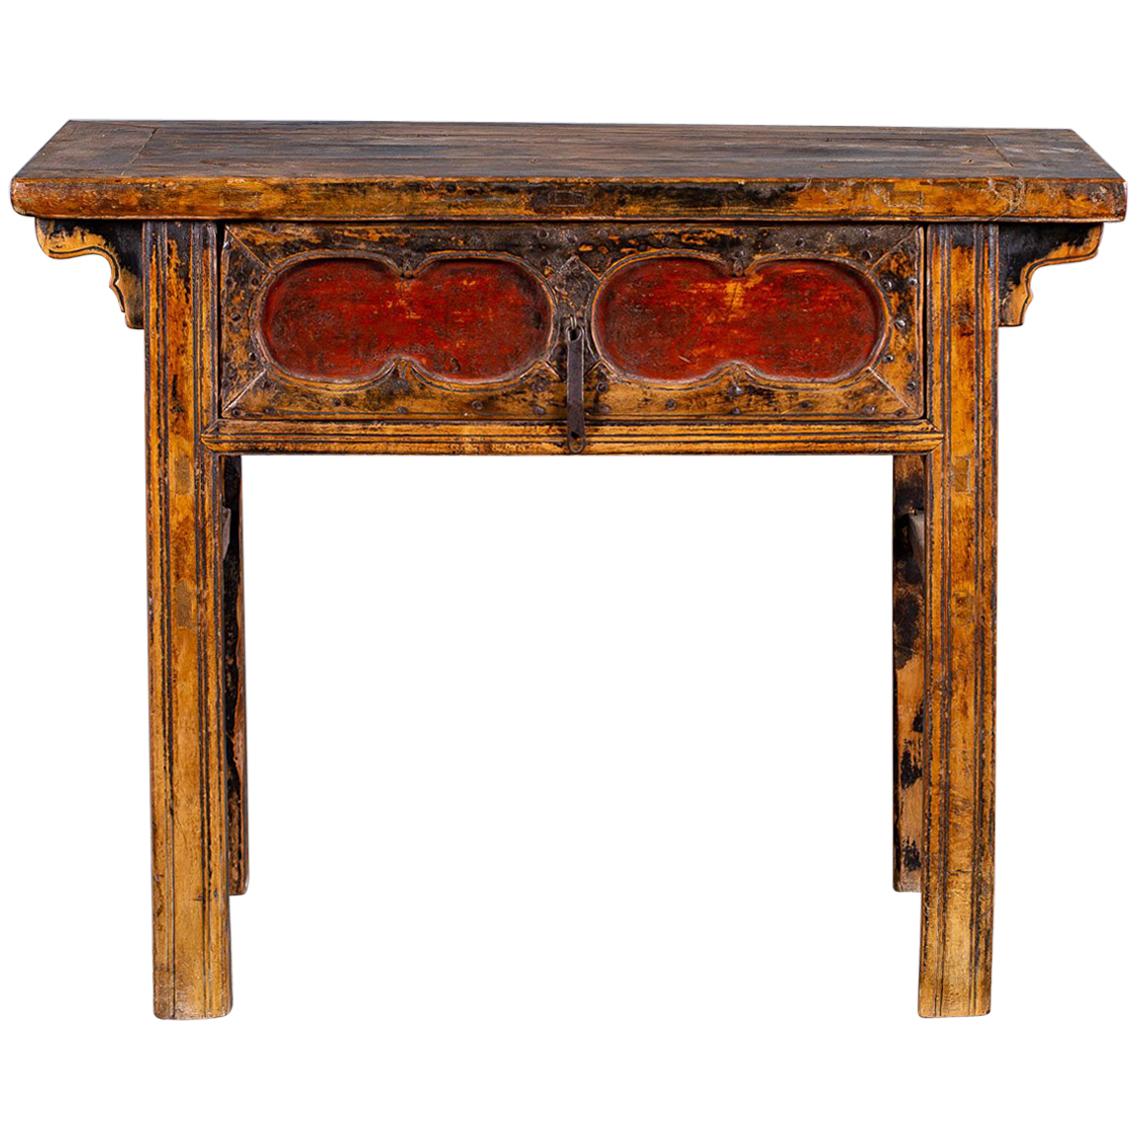 Antique Chinese Table with Drawer Kuang Hsu Period, China, circa 1875